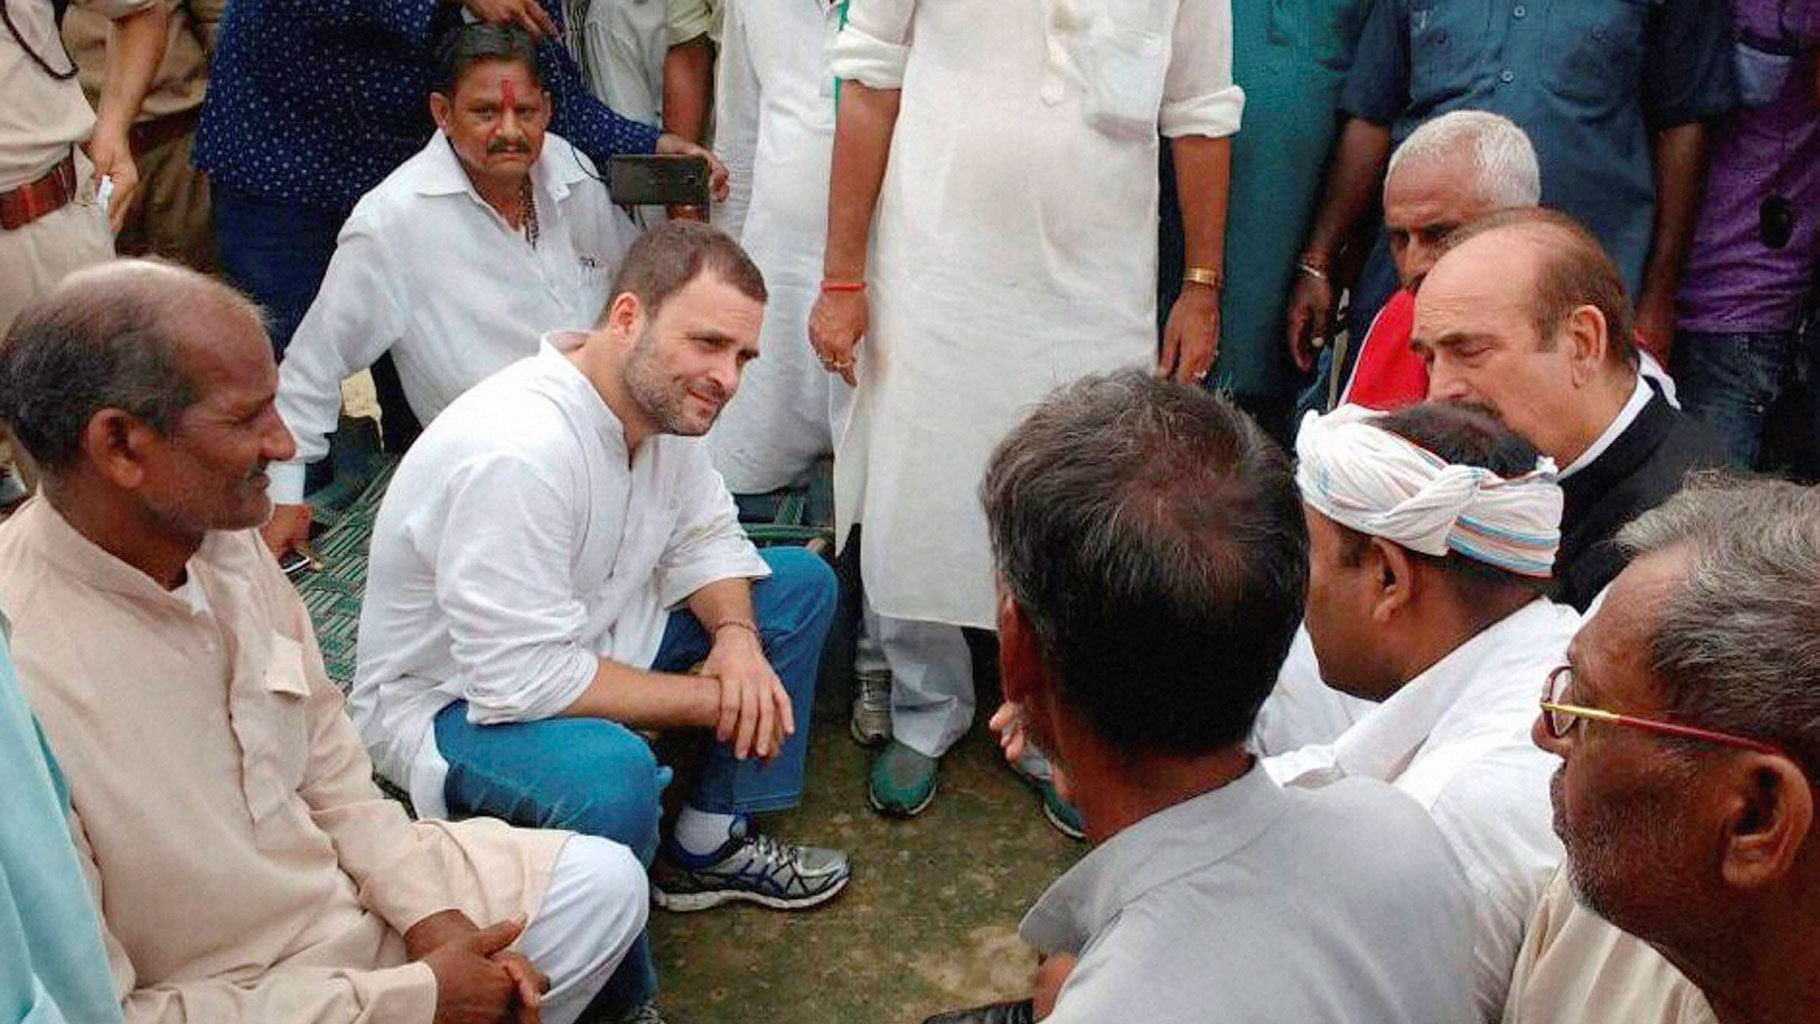 Rahul Gandhi also hit out at the Modi-led central government for its poor showing in generating employment in the country.